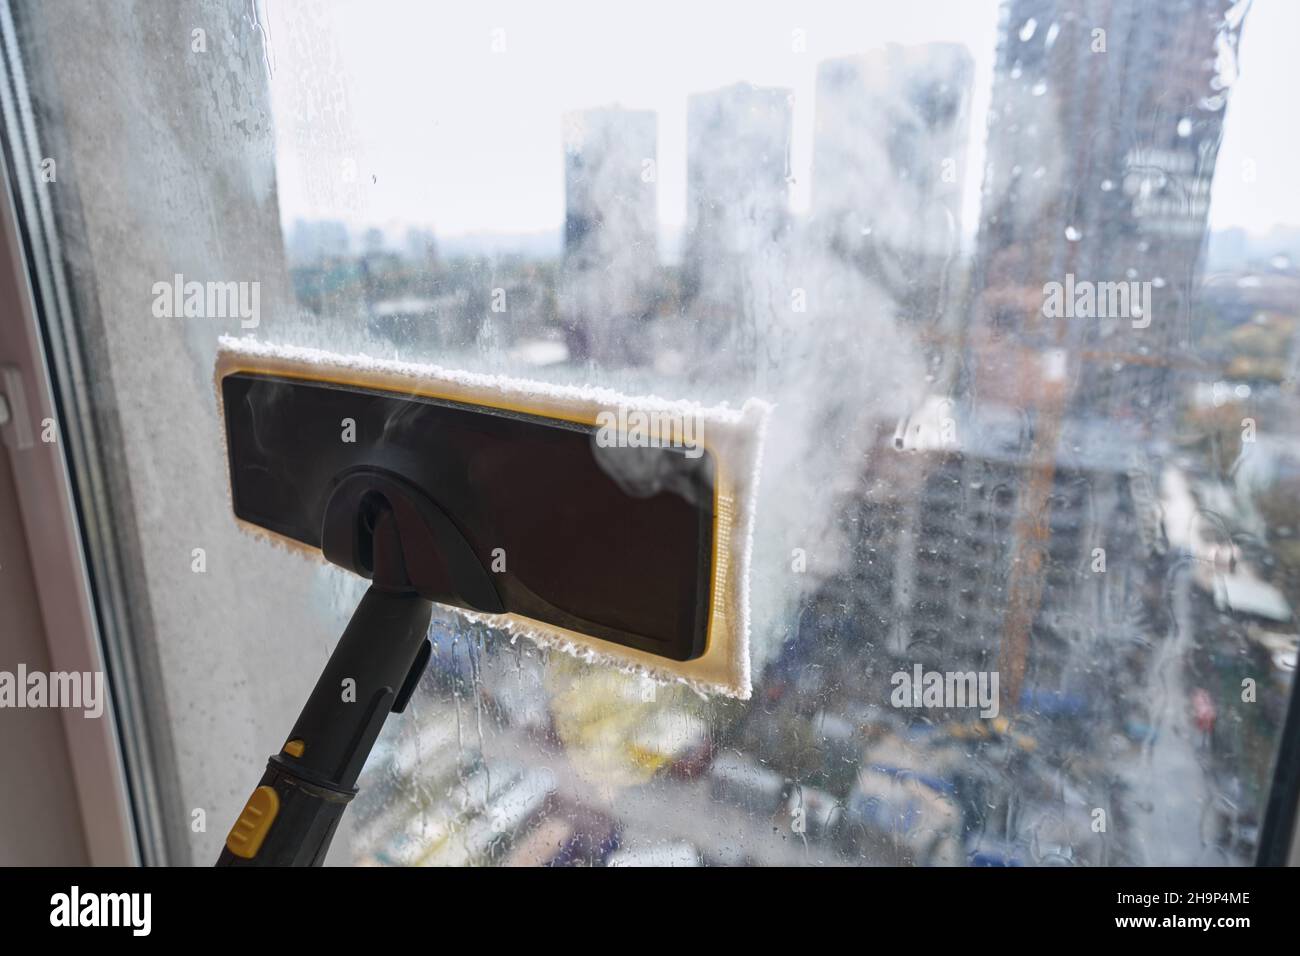 Steam Cleaning Windows with Pressure Editorial Photography - Image